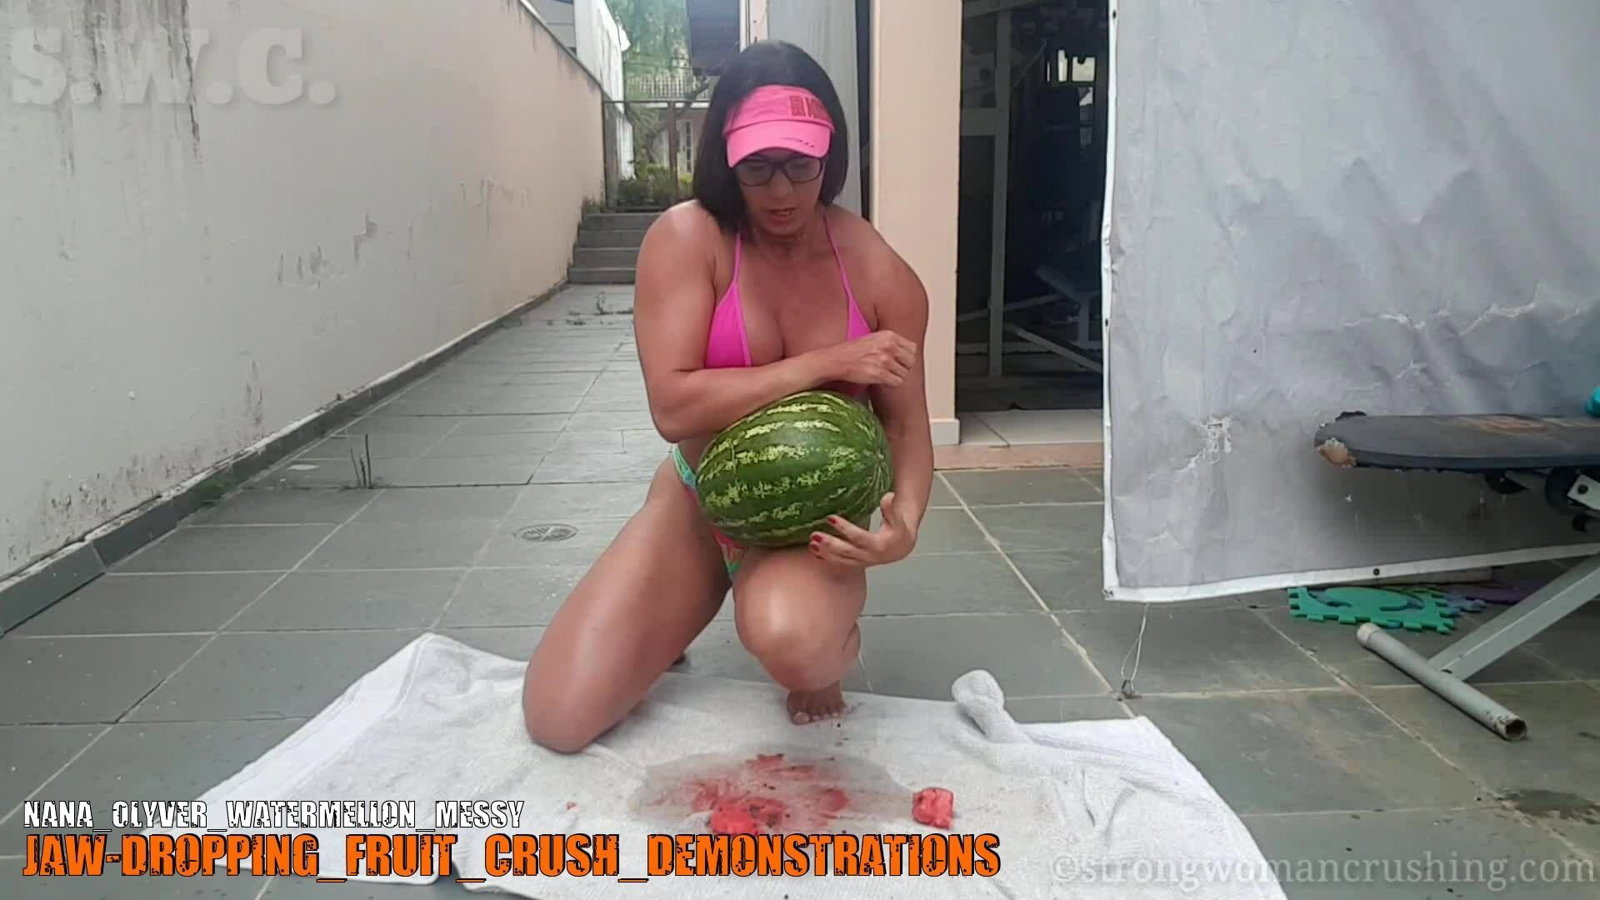 Photo by MusclegirlStrength with the username @MusclegirlStrength, who is a brand user,  October 3, 2023 at 6:52 PM and the text says '🍉🍉 Check out the hilarious new video about Nana Olyver Watermellon Messy with Nana! 🤣 Get your membership now to watch it at www.strongwomancrushing.com 💪 #StrongWomanCrushing #NanaOlyver #WatermellonMessy #FunnyVideos #MembershipBenefits'